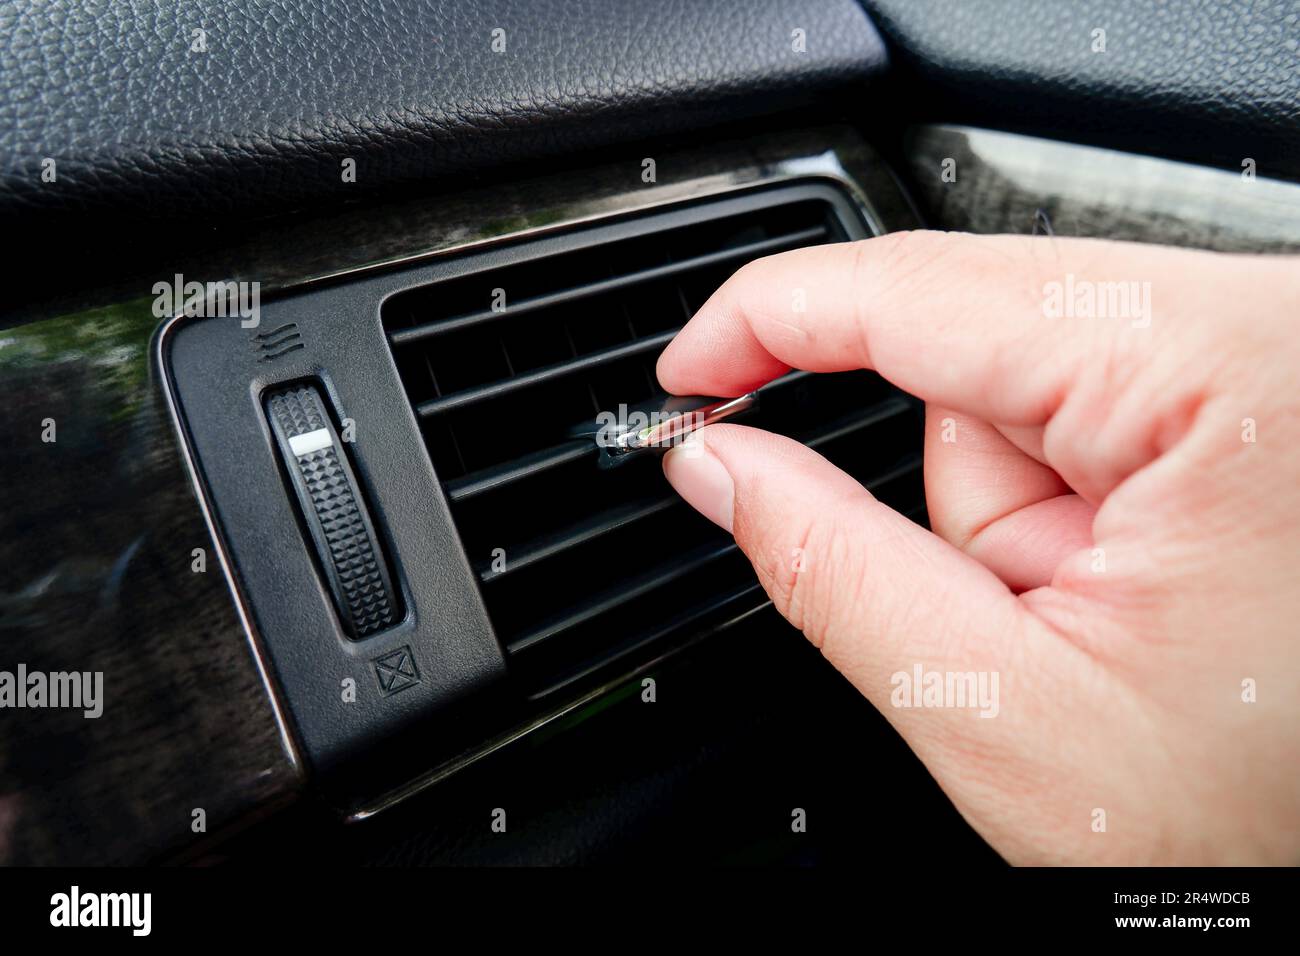 Driver Hand Tuning Air Ventilation Grille Stock Photo - Download Image Now  - Car, Air Conditioner, Air Duct - iStock